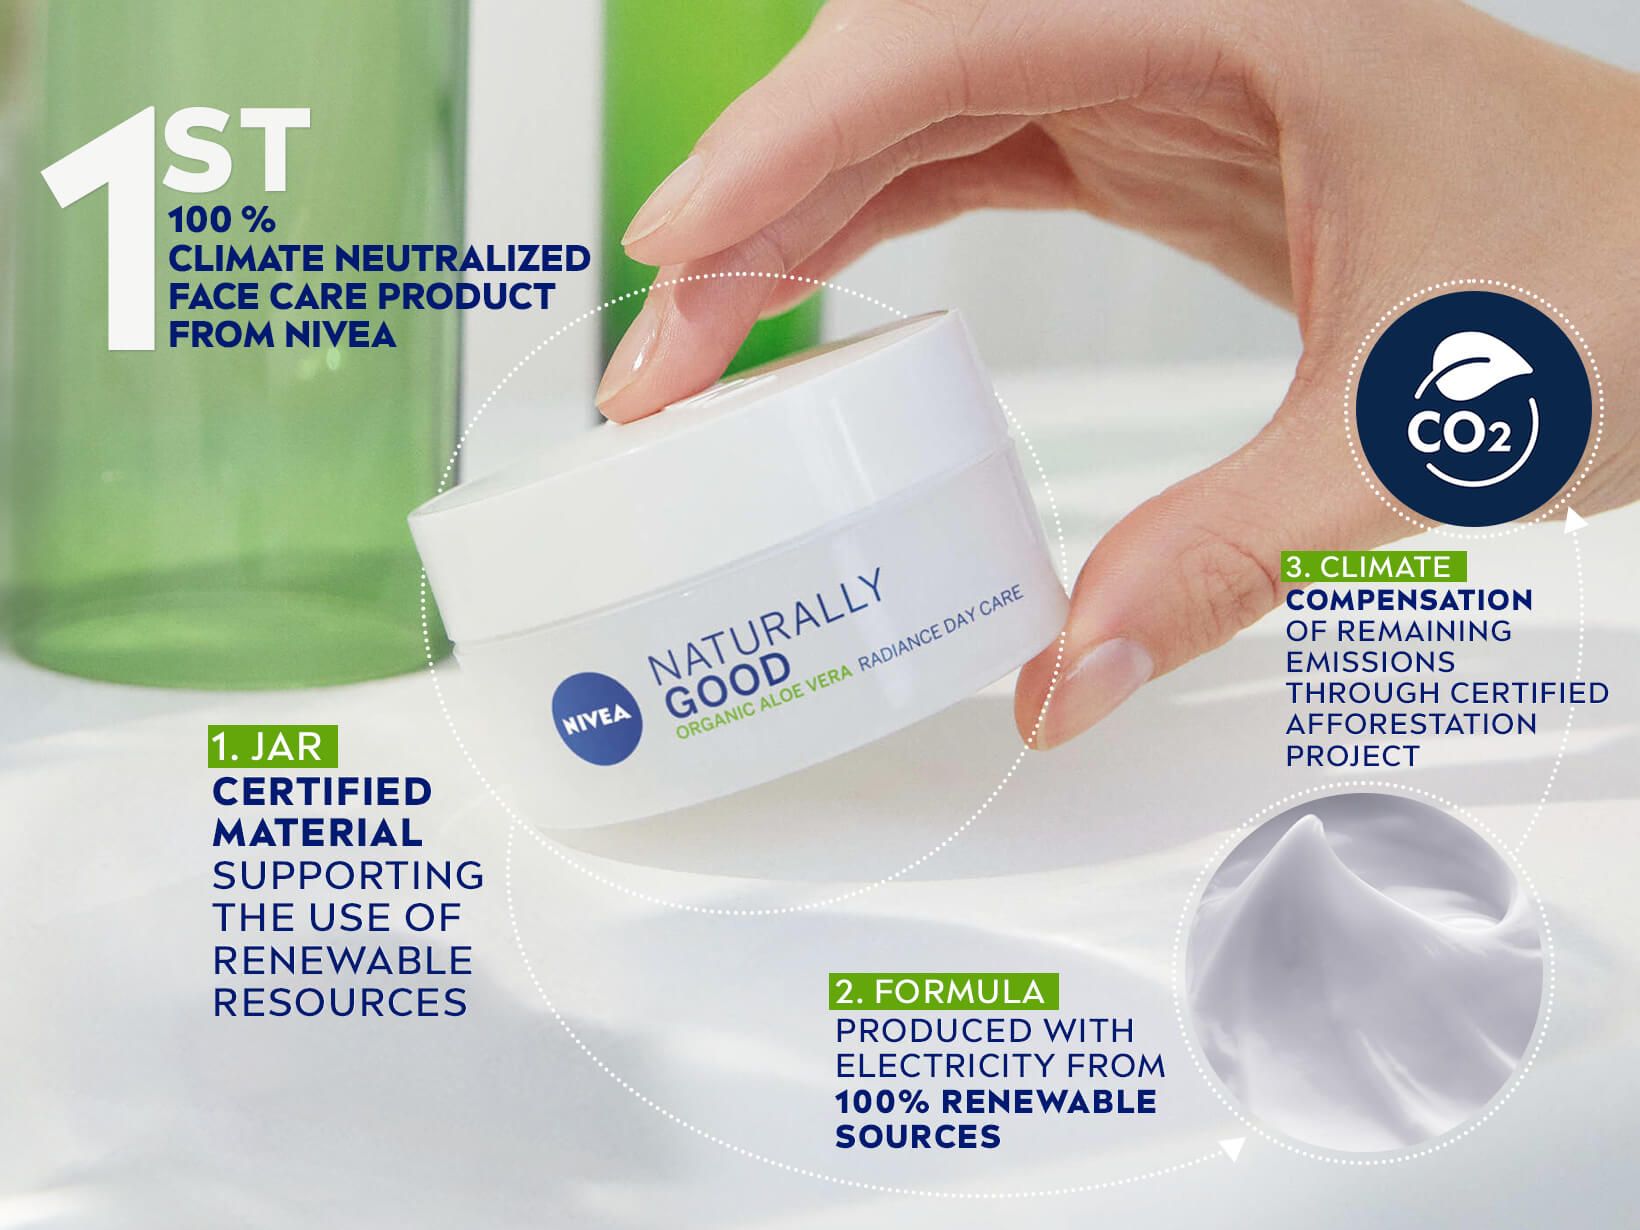 Naturally Good Face Care - First 100% Climate Neutralized products from NIVEA